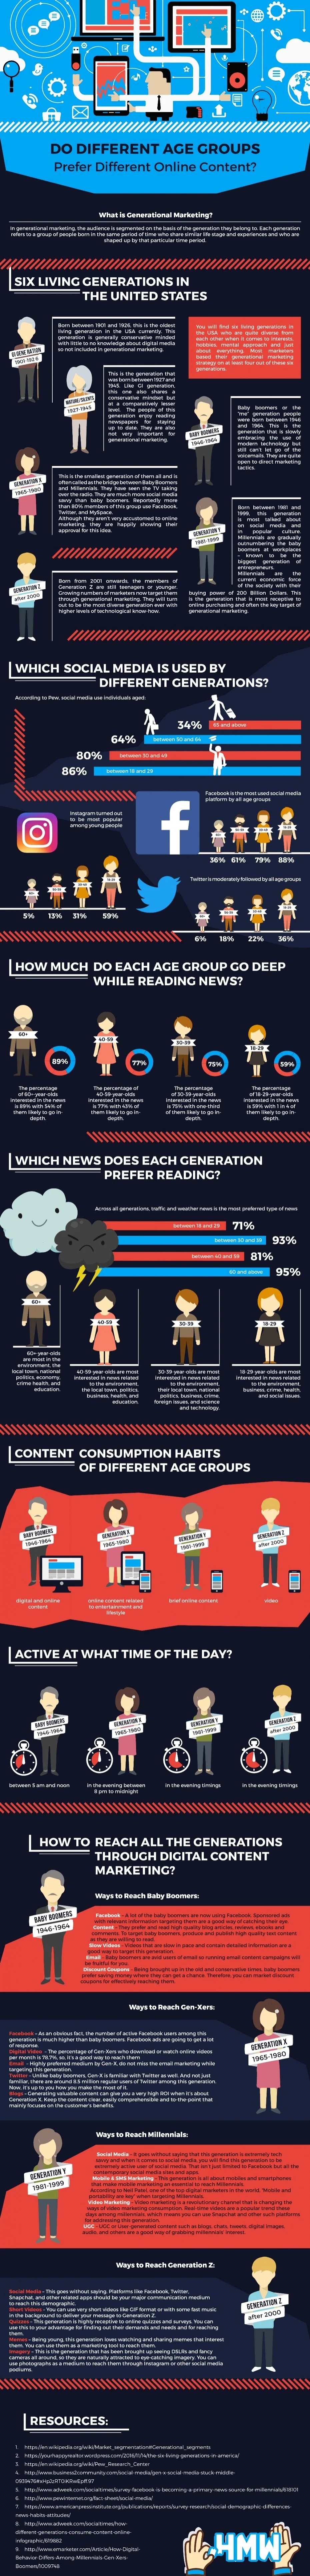 Do Different Age Groups Prefer Different Online Content? - #infographic